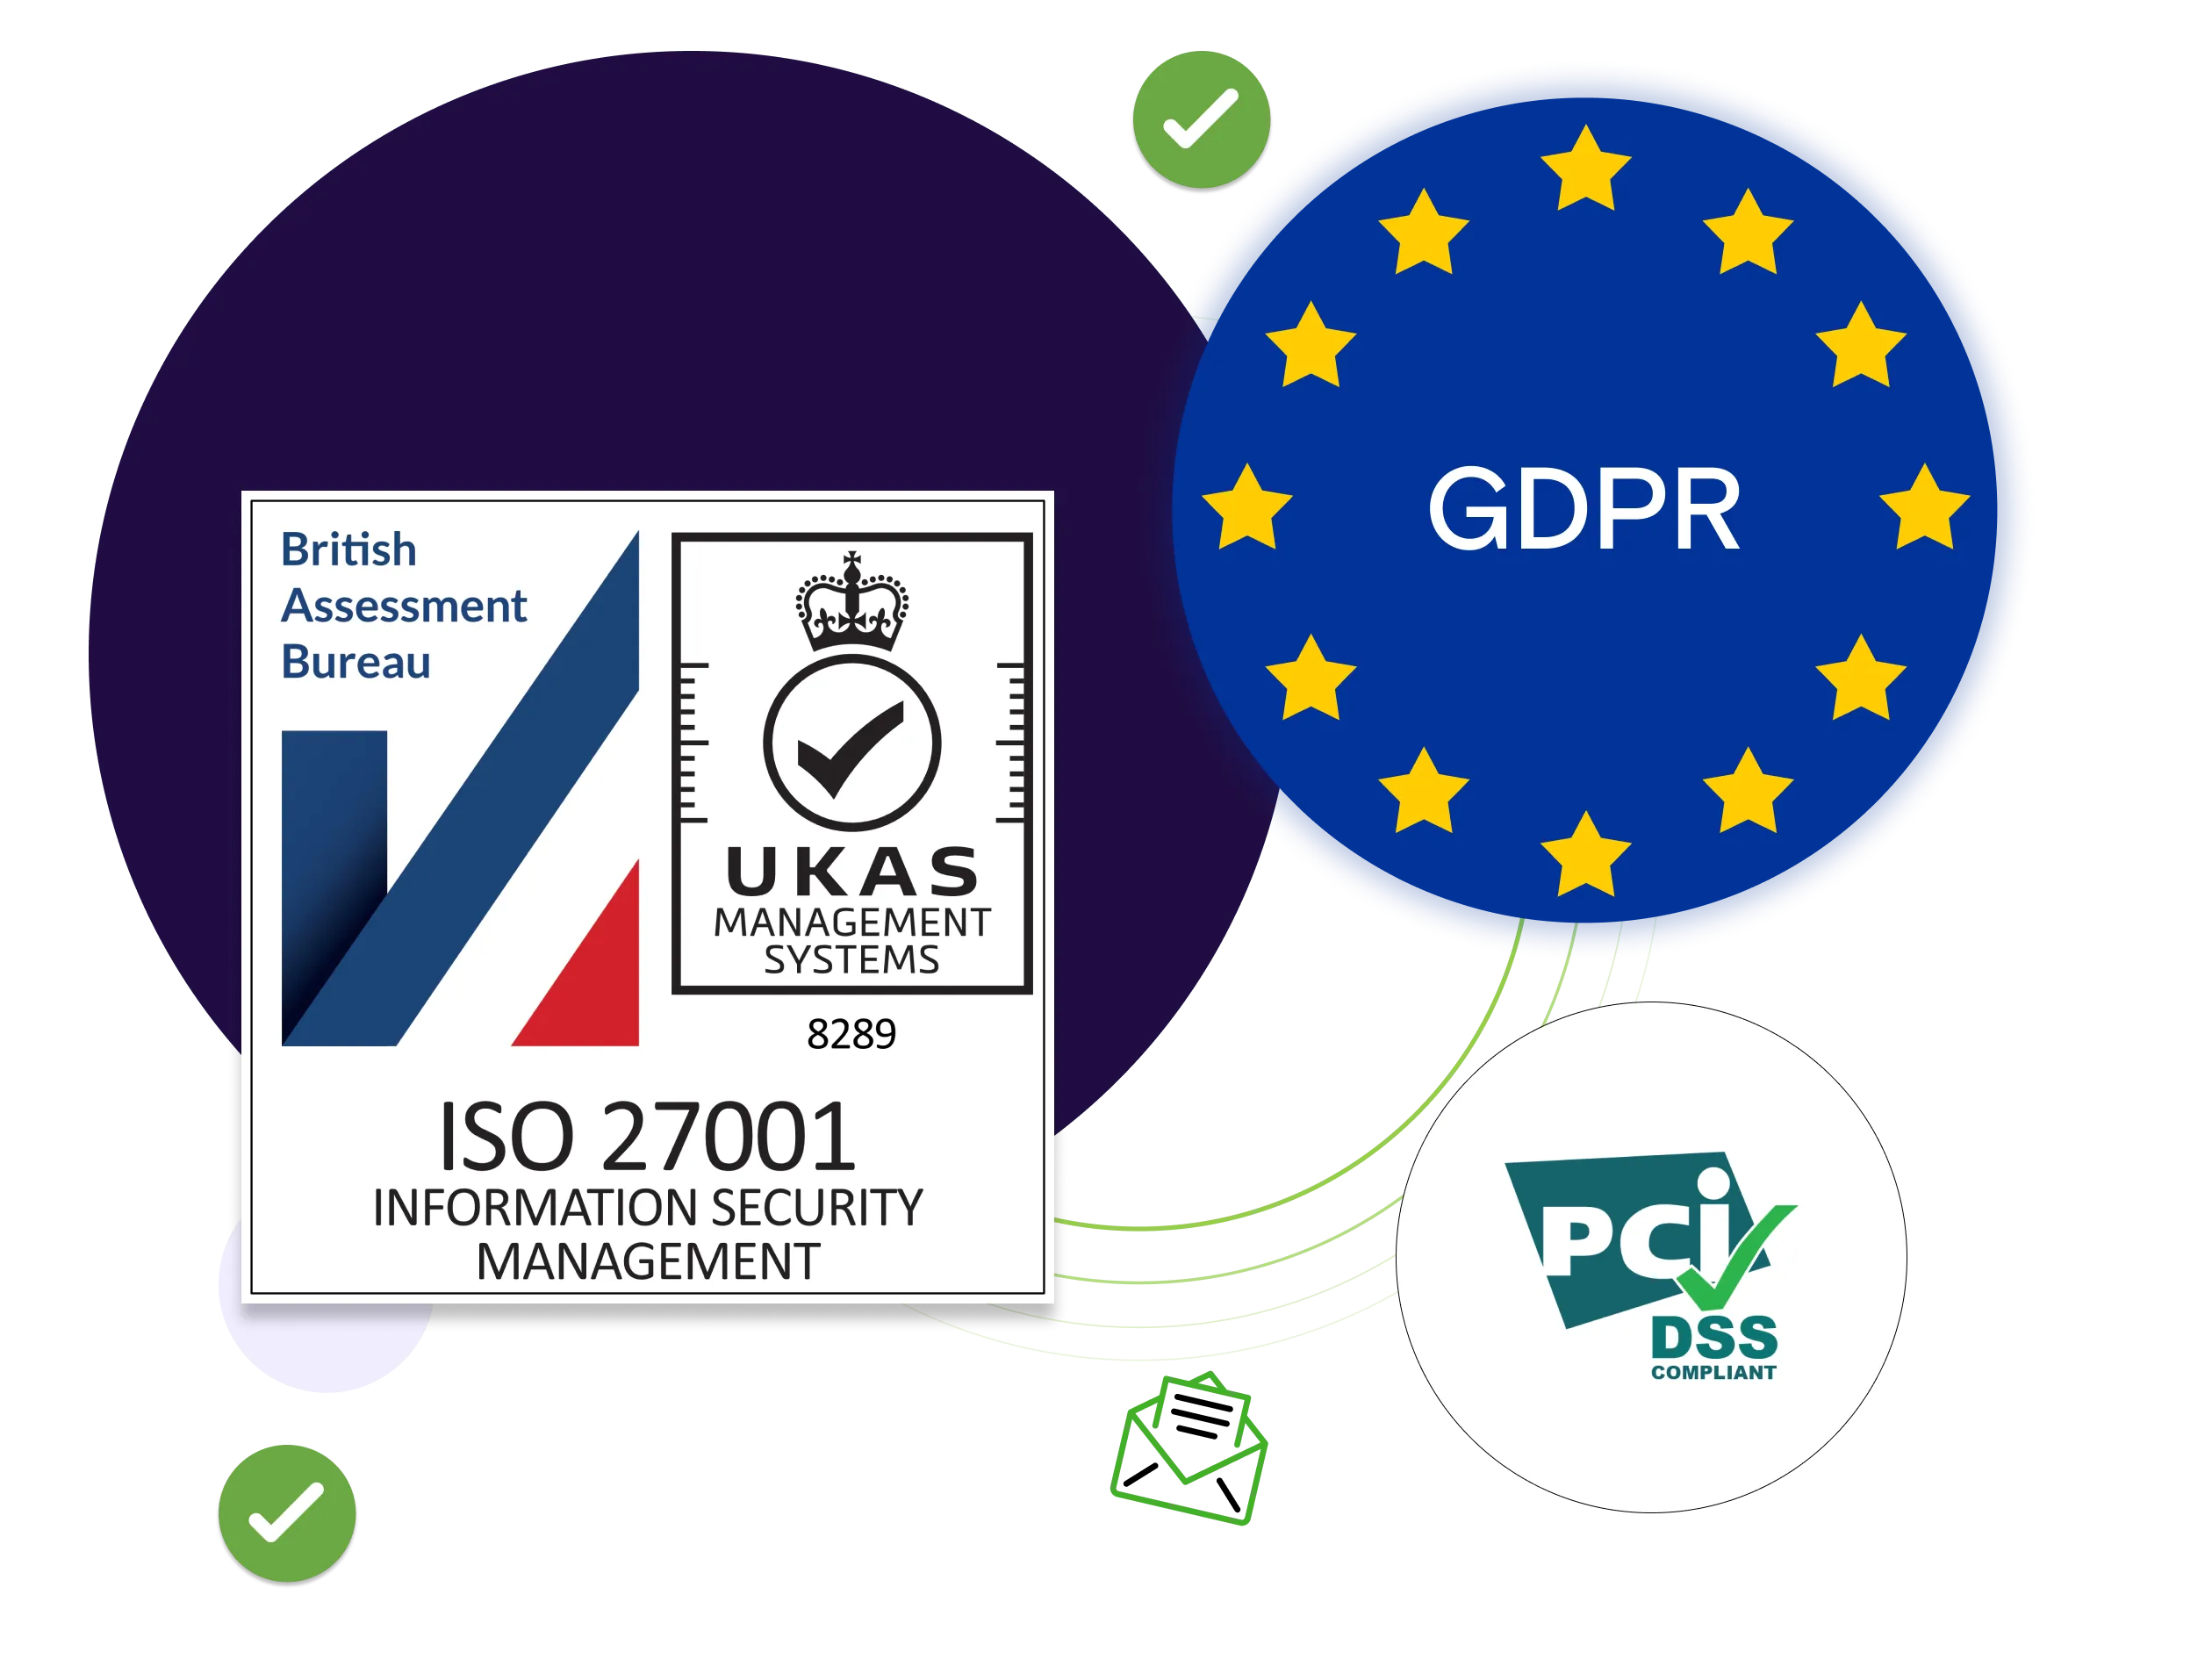 ISO 27001, GDPR, and PCI DSS